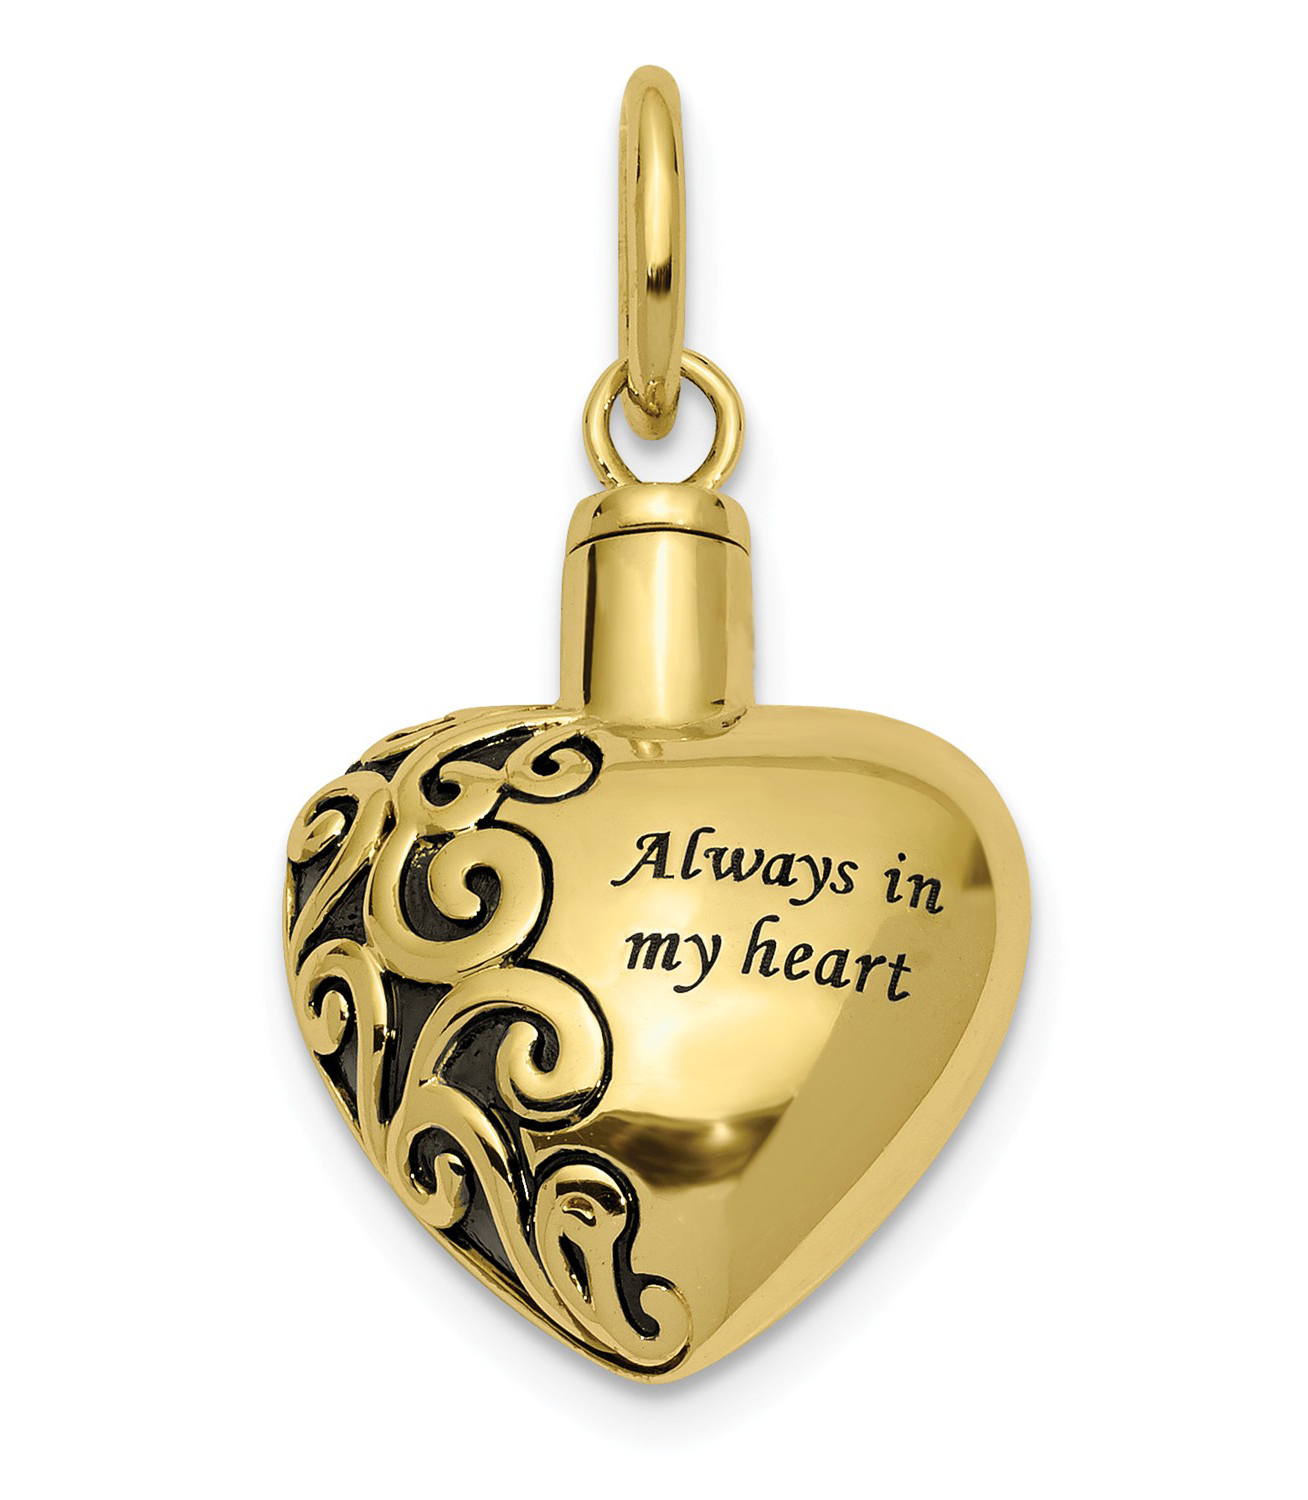 Antiqued 10k yellow gold ash holder with engraved 'Always in My Heart' text and scroll work. Ash holder comes with a funnel, Allen wrench, glue, spoon and a black velour pouch. The cremation vessel arrives packaged in a gift box, perfect for gift giving.